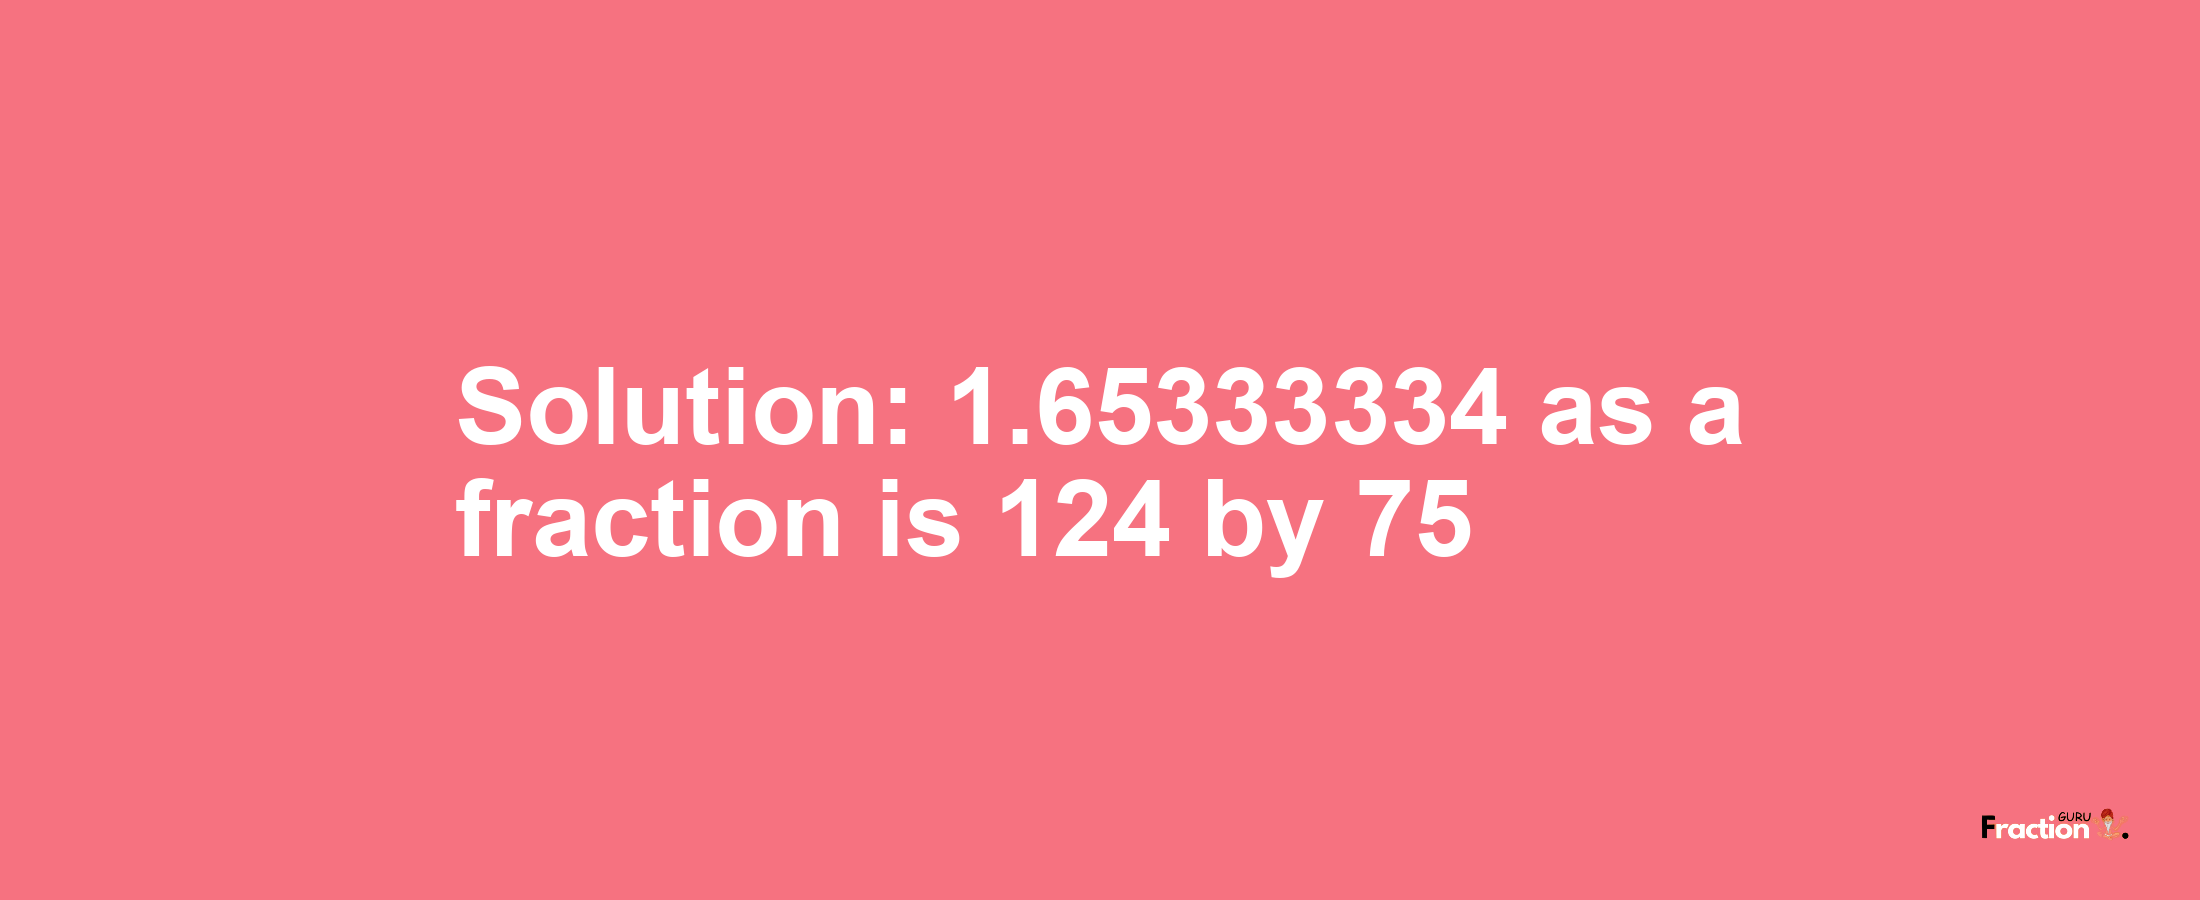 Solution:1.65333334 as a fraction is 124/75